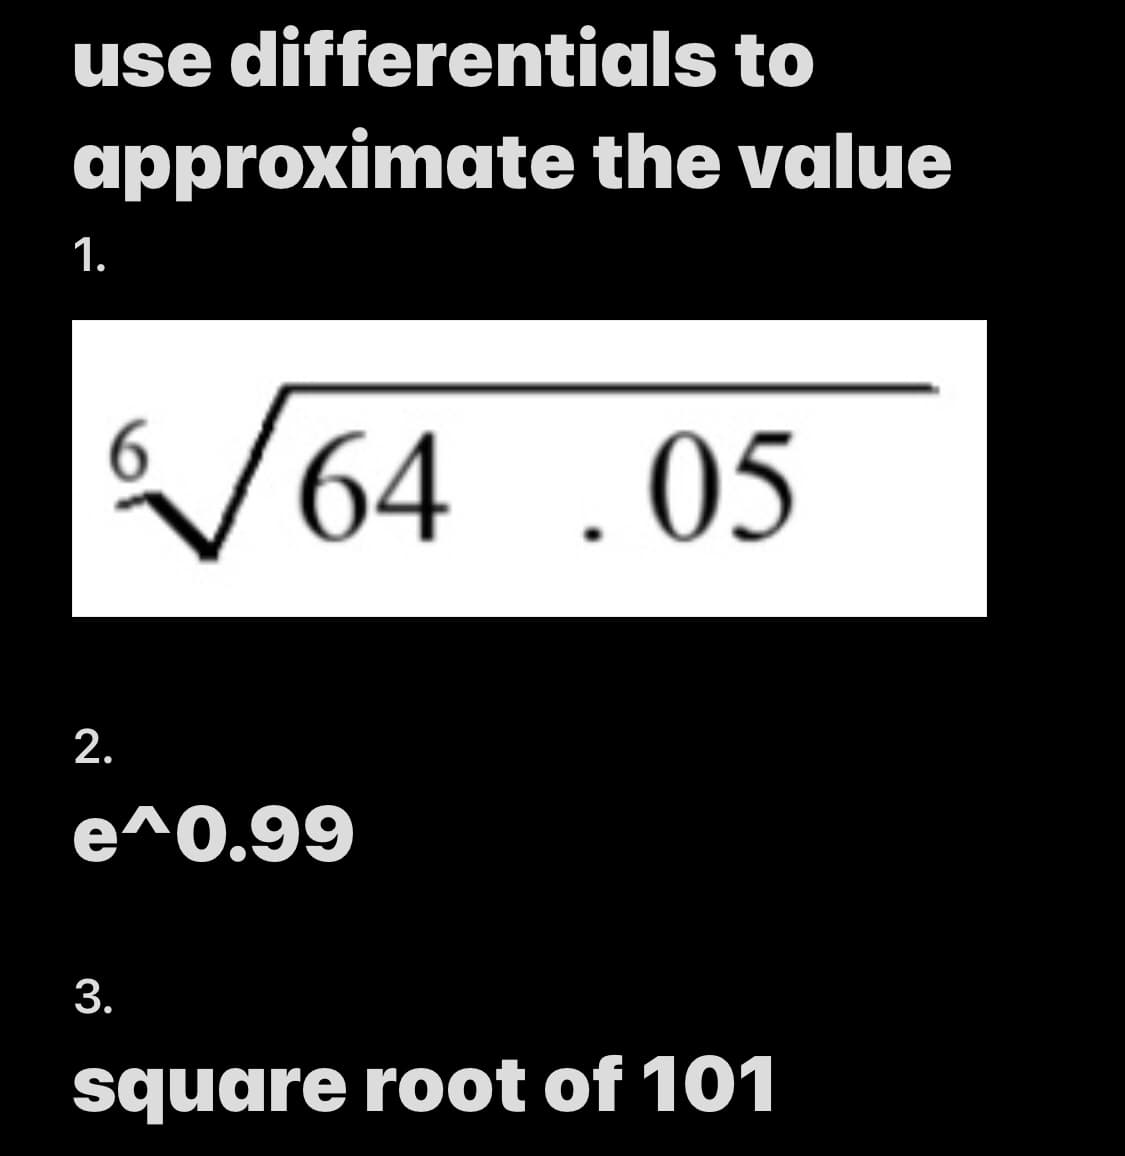 use differentials to
approximate
1.
64 .05
2.
e^0.99
3.
square root of 101
the value